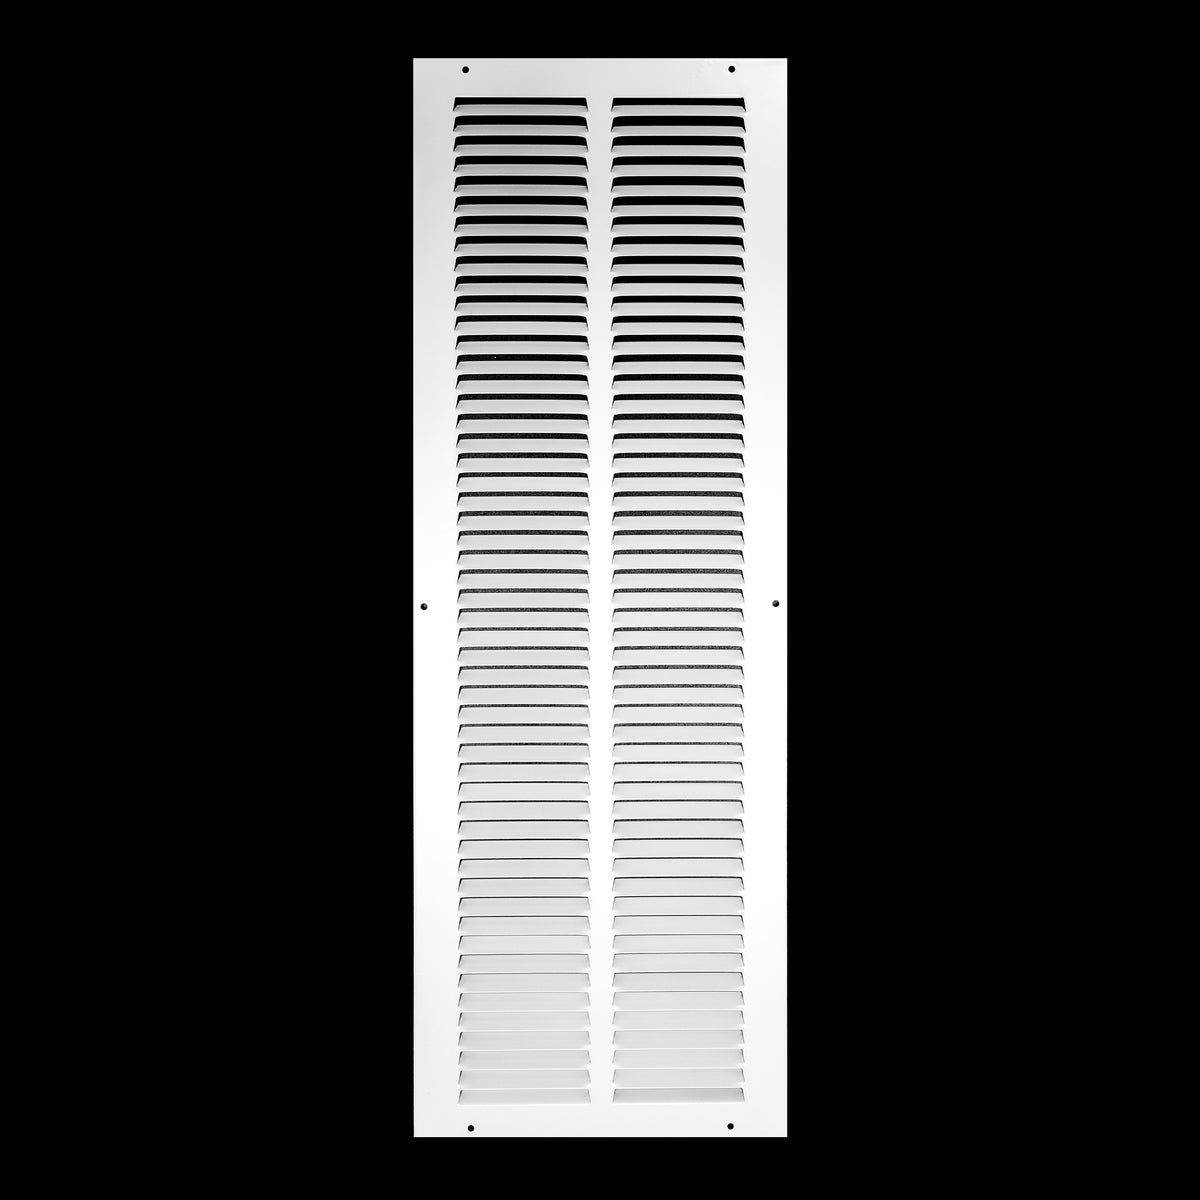 airgrilles 8" x 26" duct opening steel return air grille for sidewall and ceiling hnd-flt-1rag-wh-8x26 038775628648 1